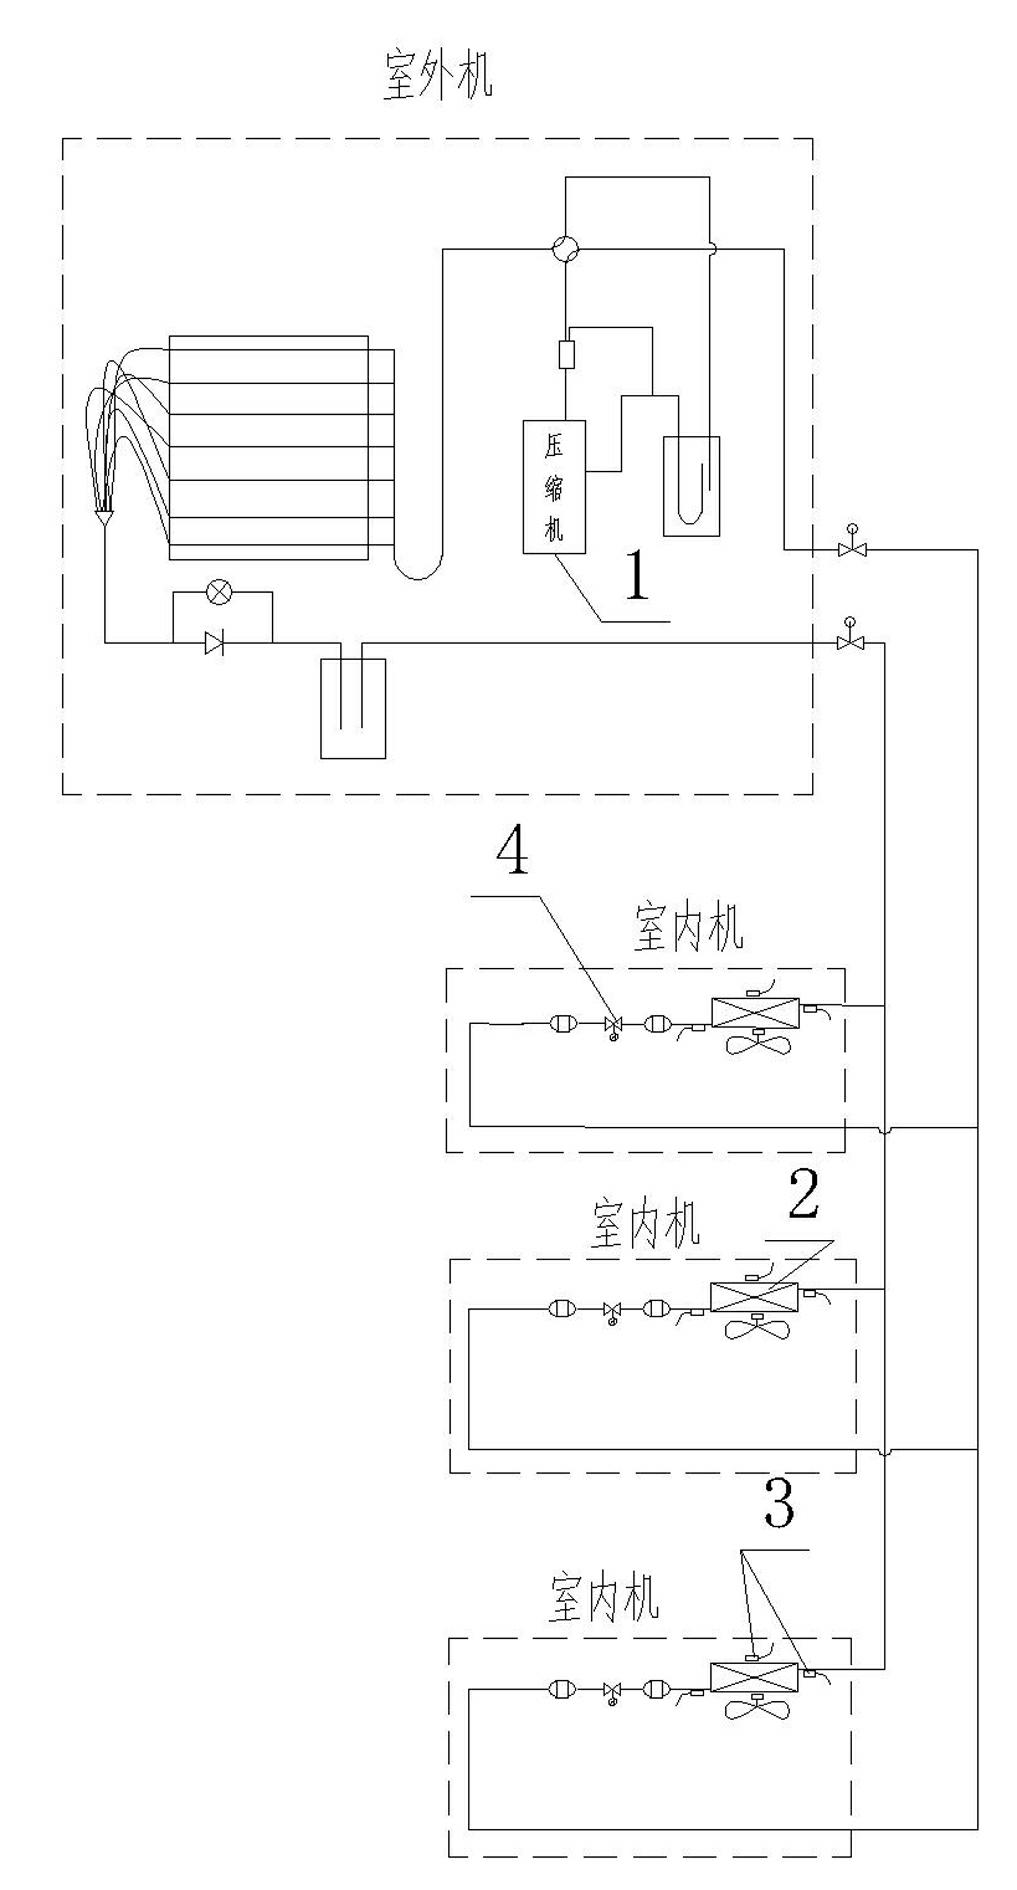 The Control Method of Preventing Refrigerant Drift Flow During